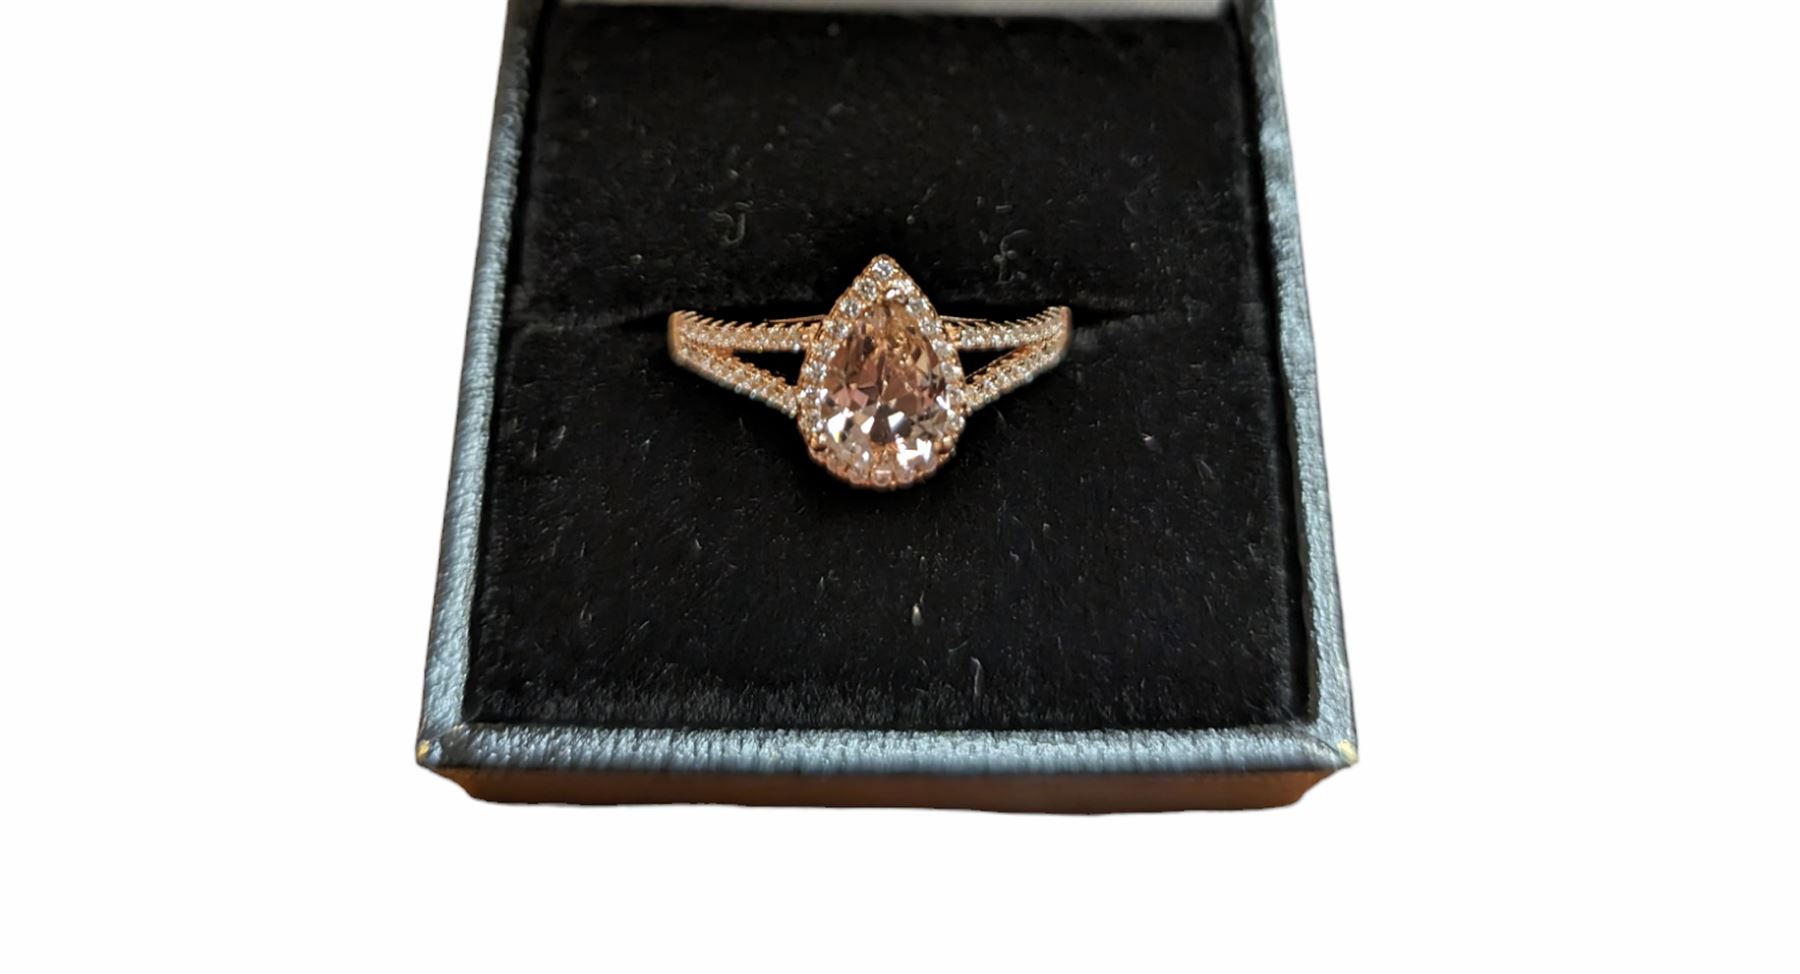 Silver-gilt cubic zirconia and pear shaped pink stone dress ring - Image 2 of 2